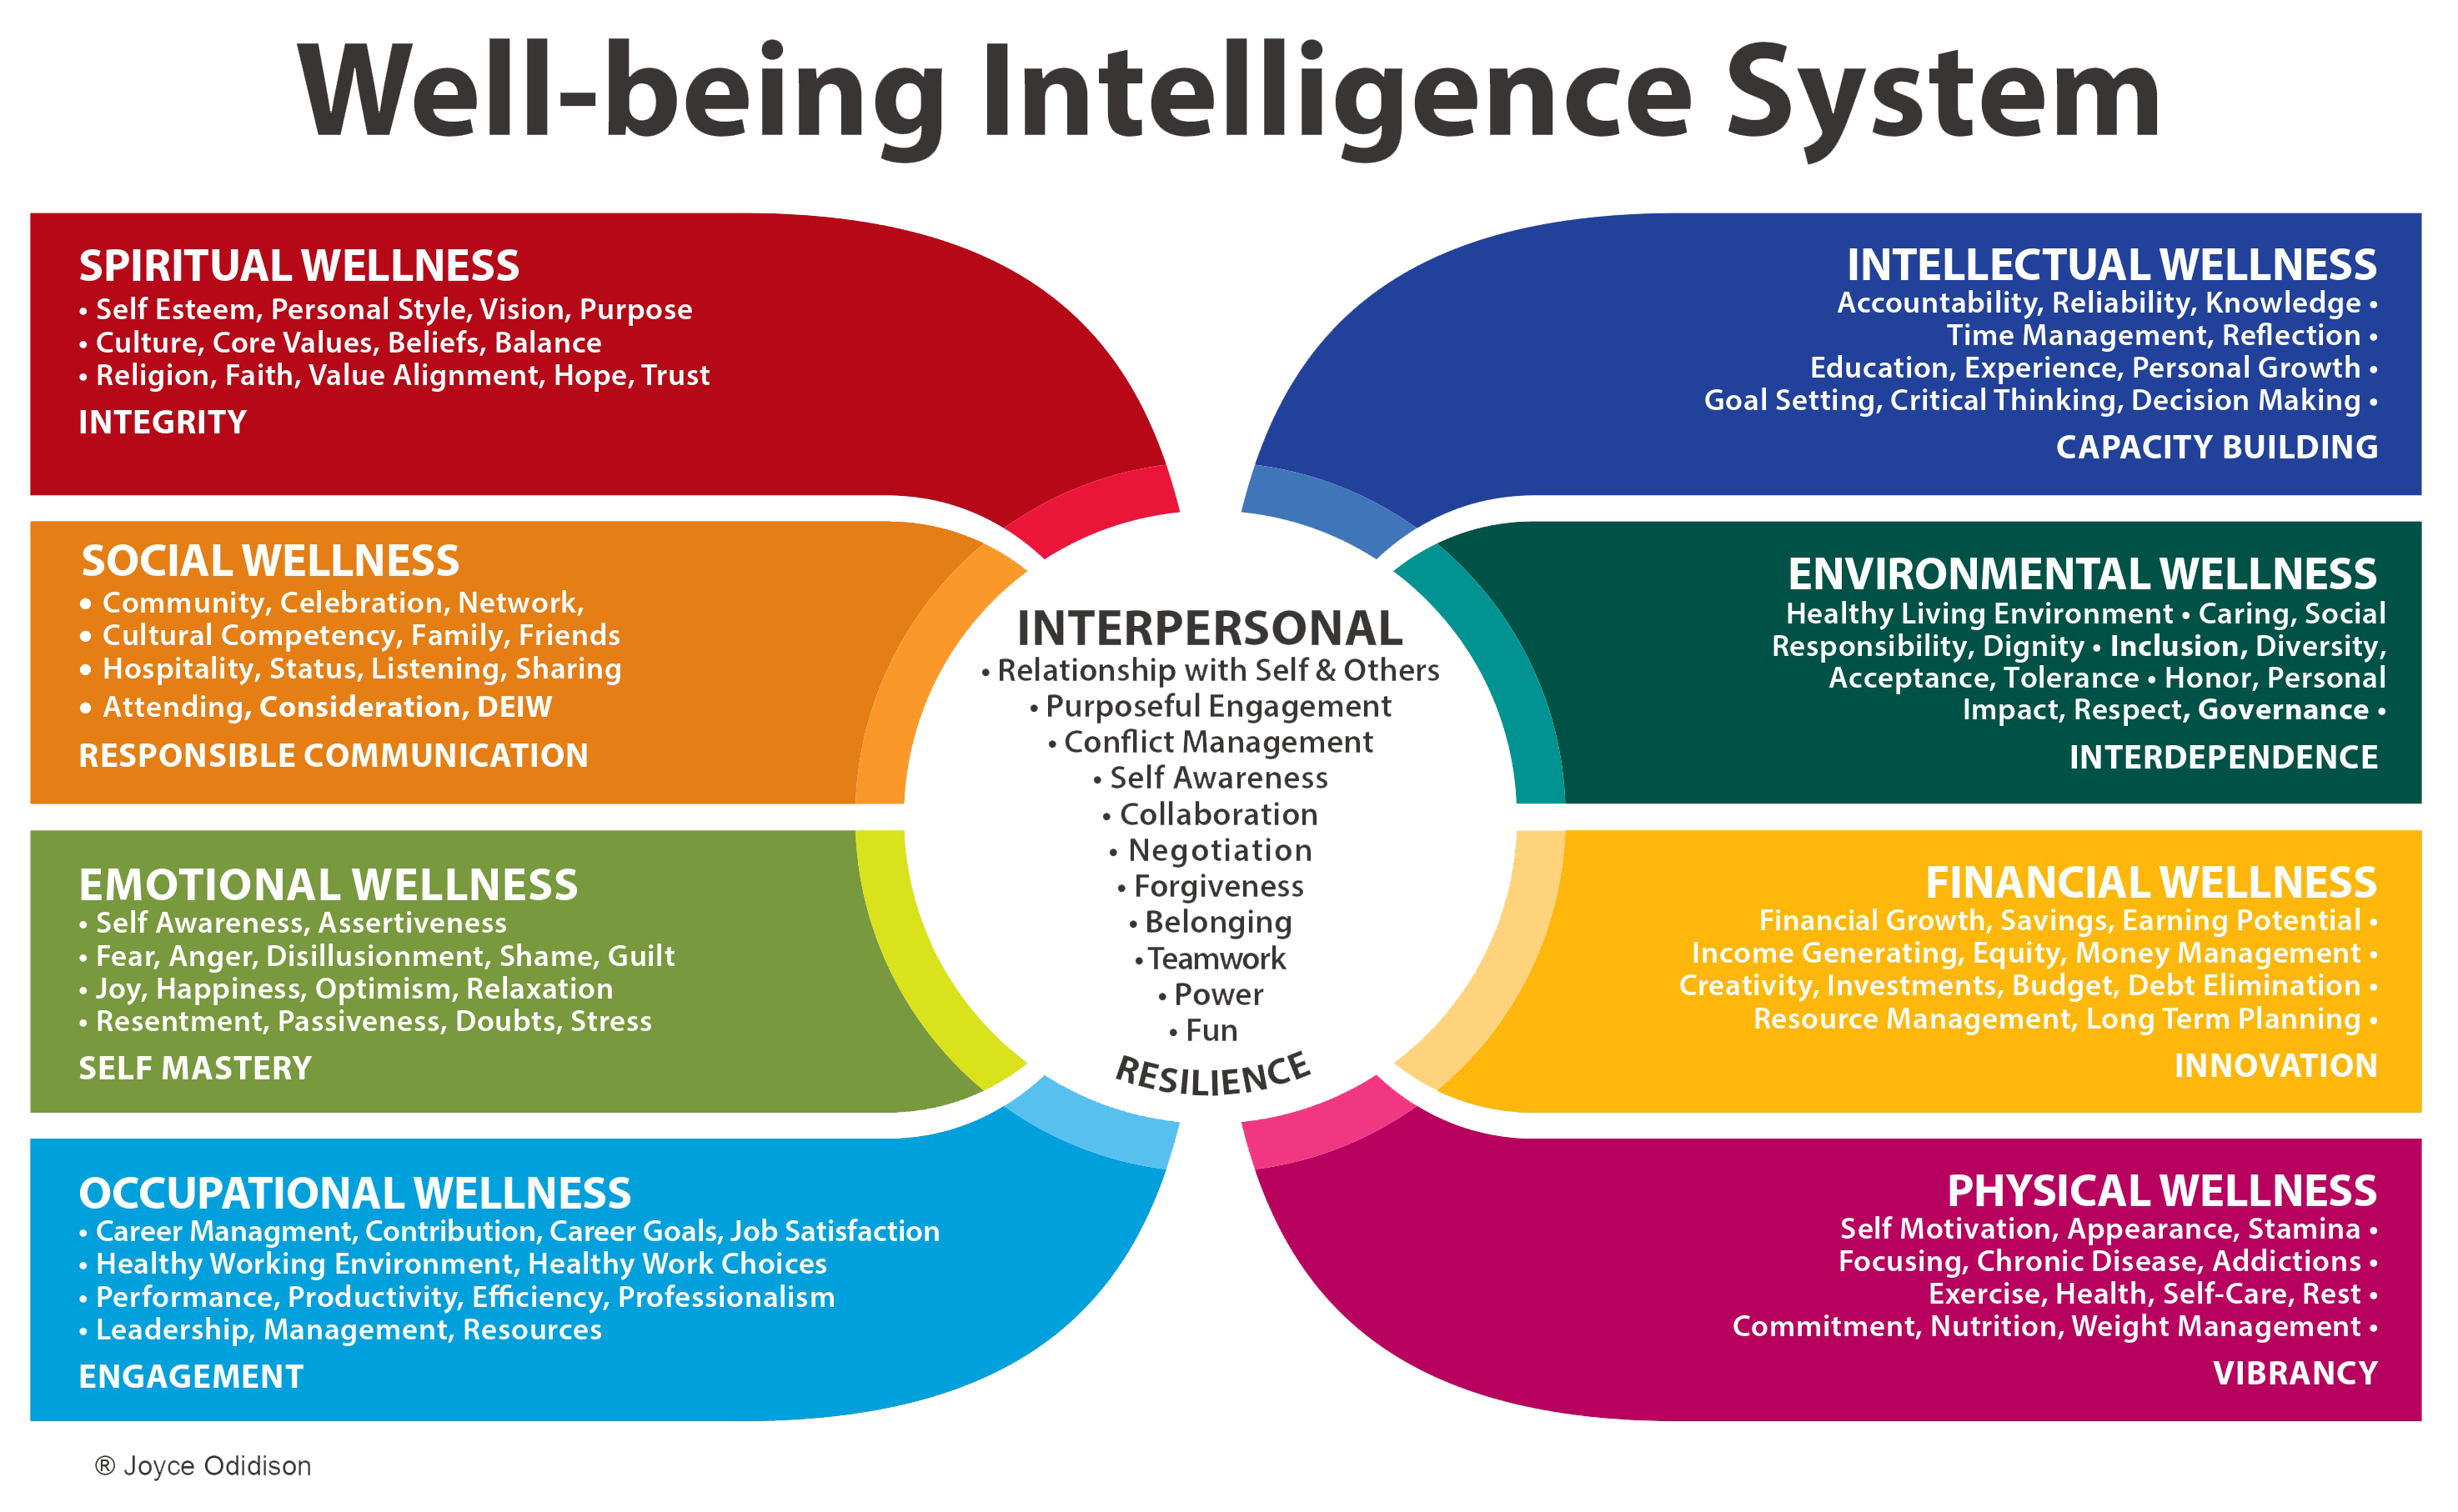 WIS well-being intelligence System